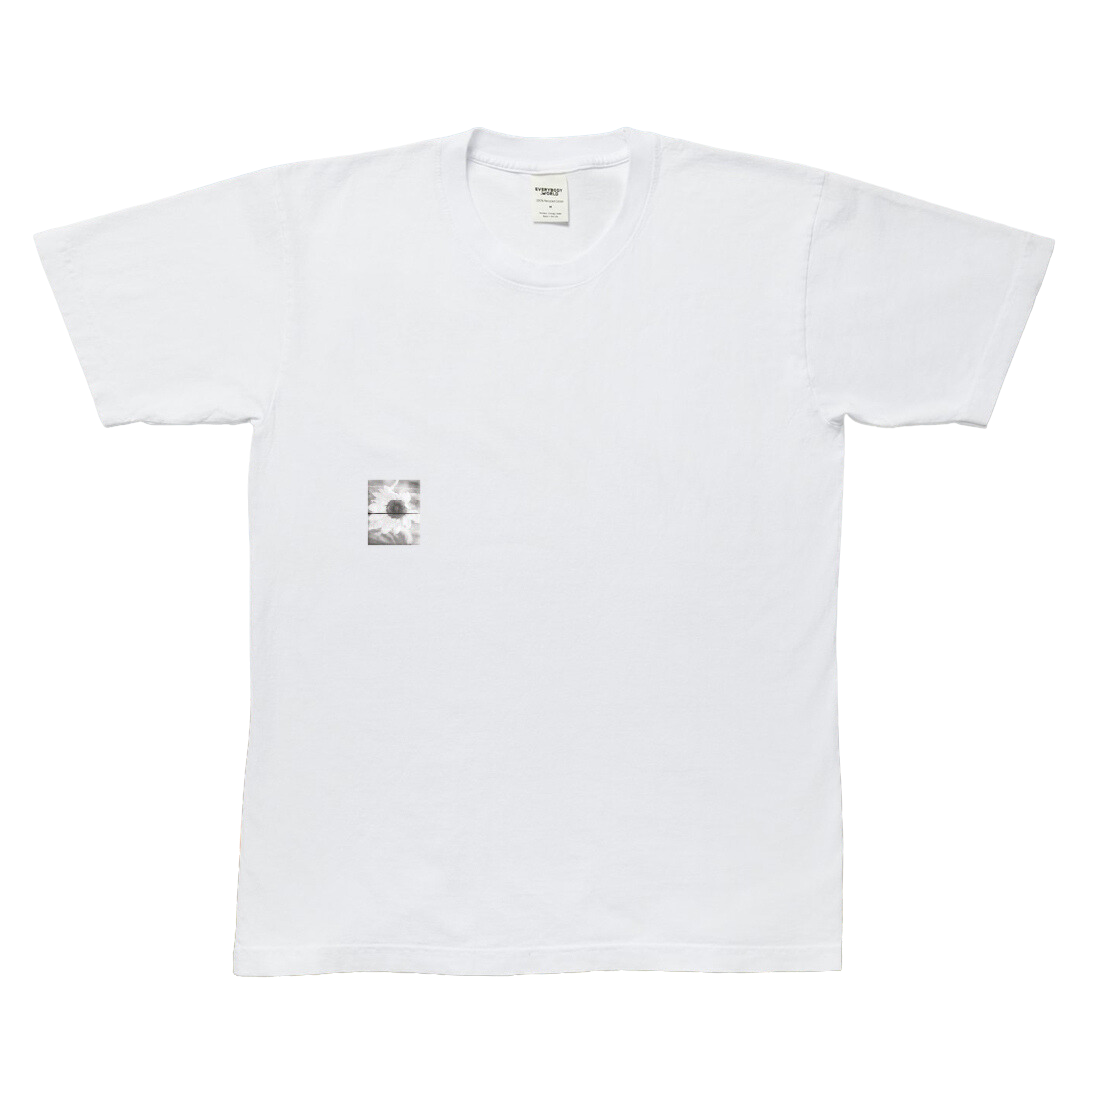 Ben Howard - Collections From The Whiteout: Spiral Tee (White)